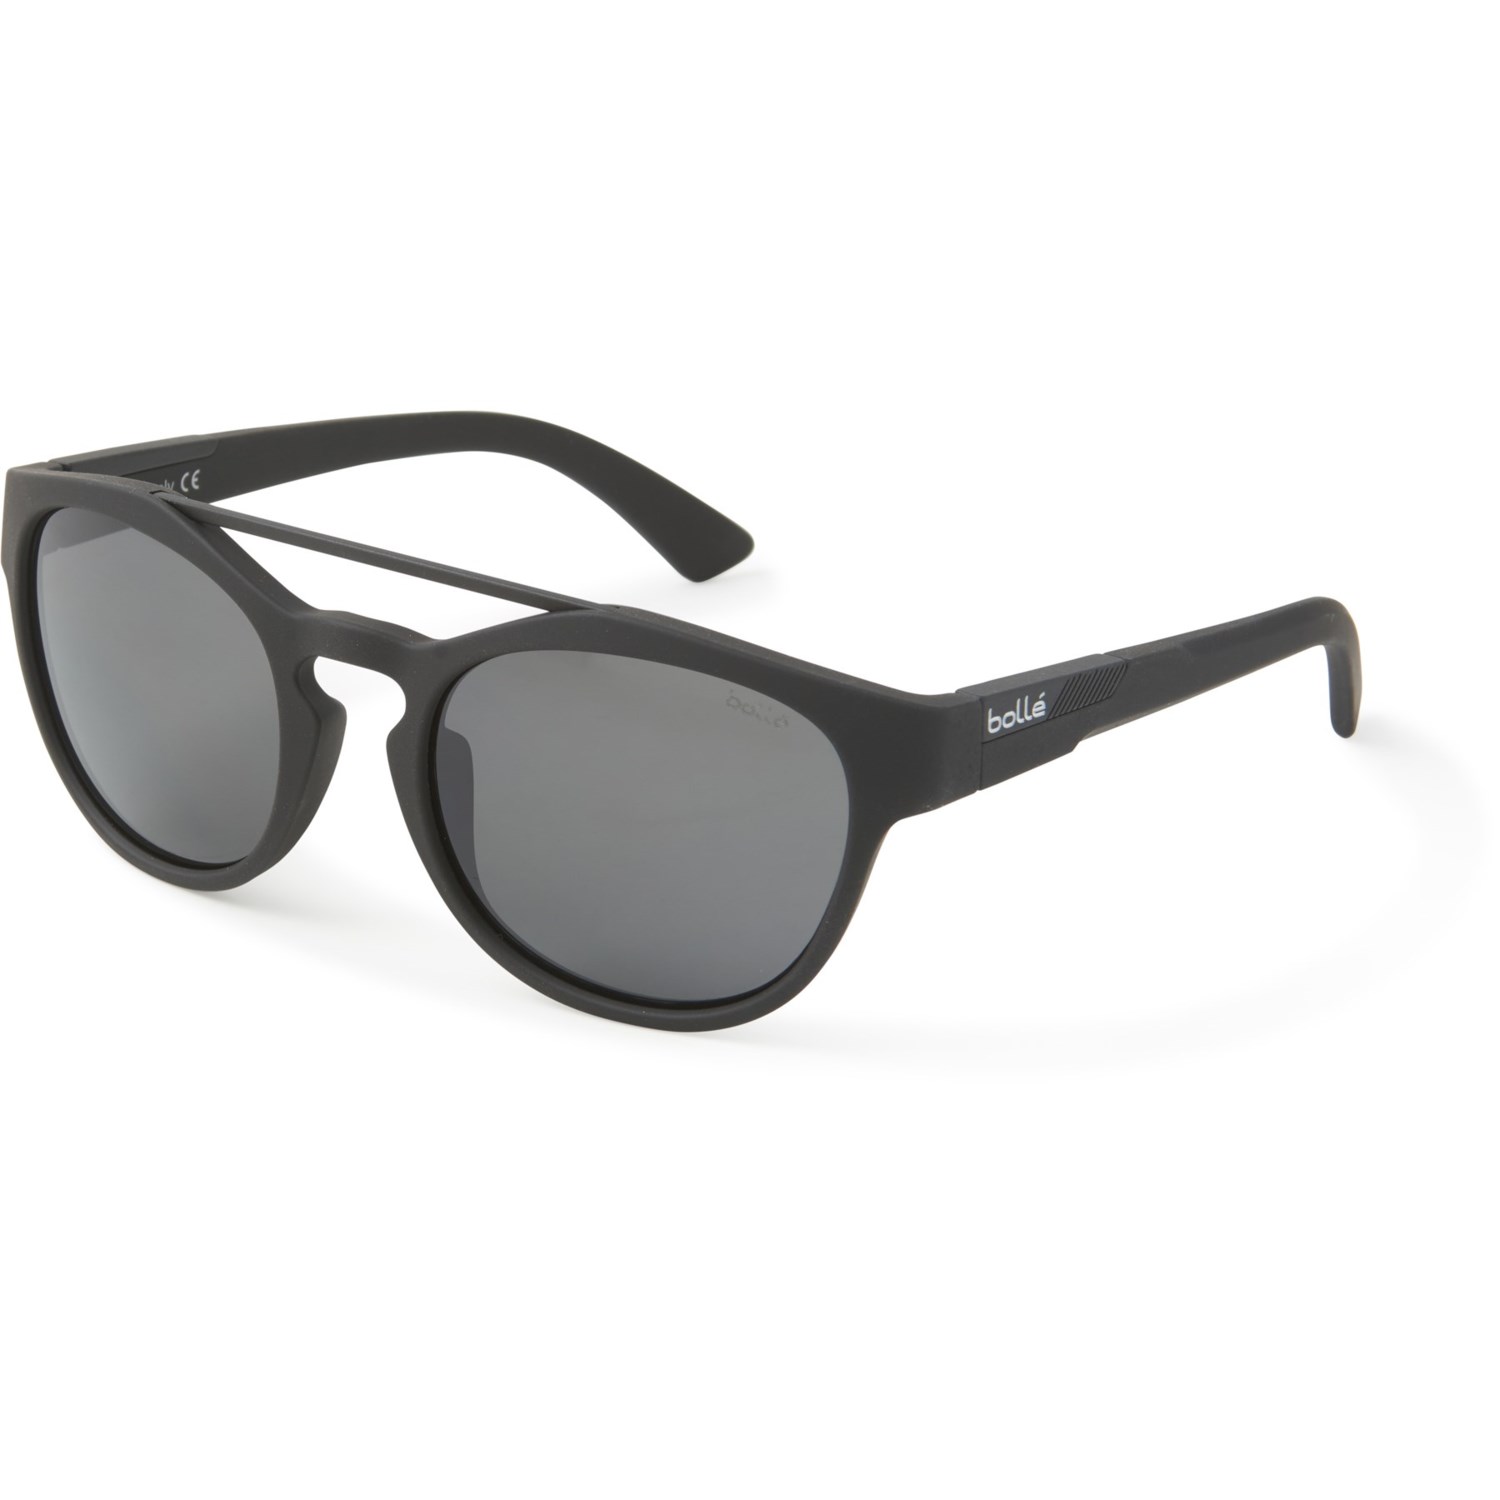 Bolle Boxton HD Sunglasses (For Men and Women) - Save 50%